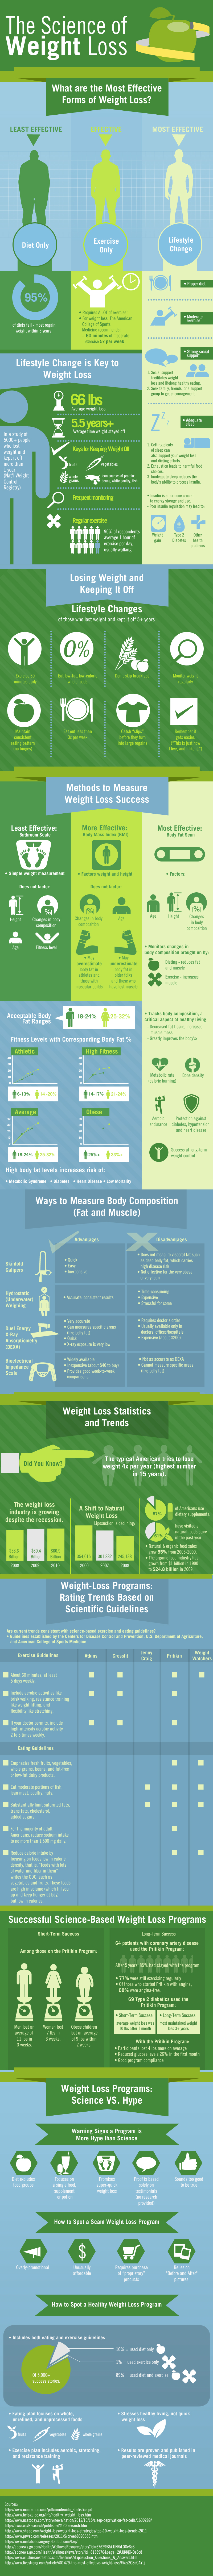 Weight Loss: How To Make It Work Infographic